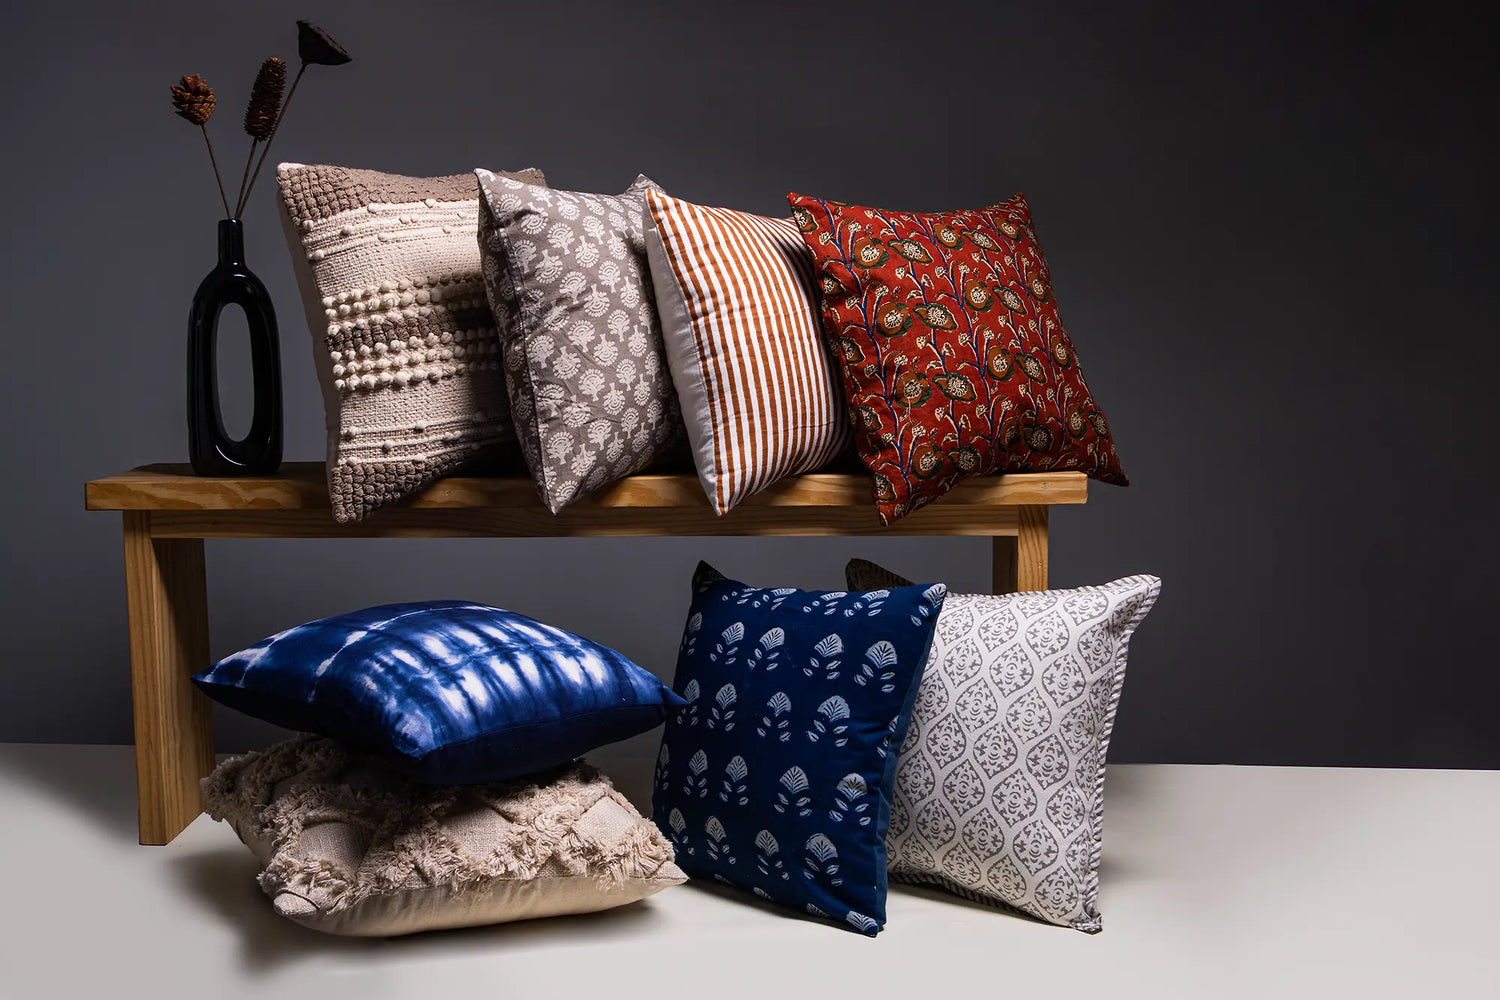  Best Sofa Cushion Covers sets Online India